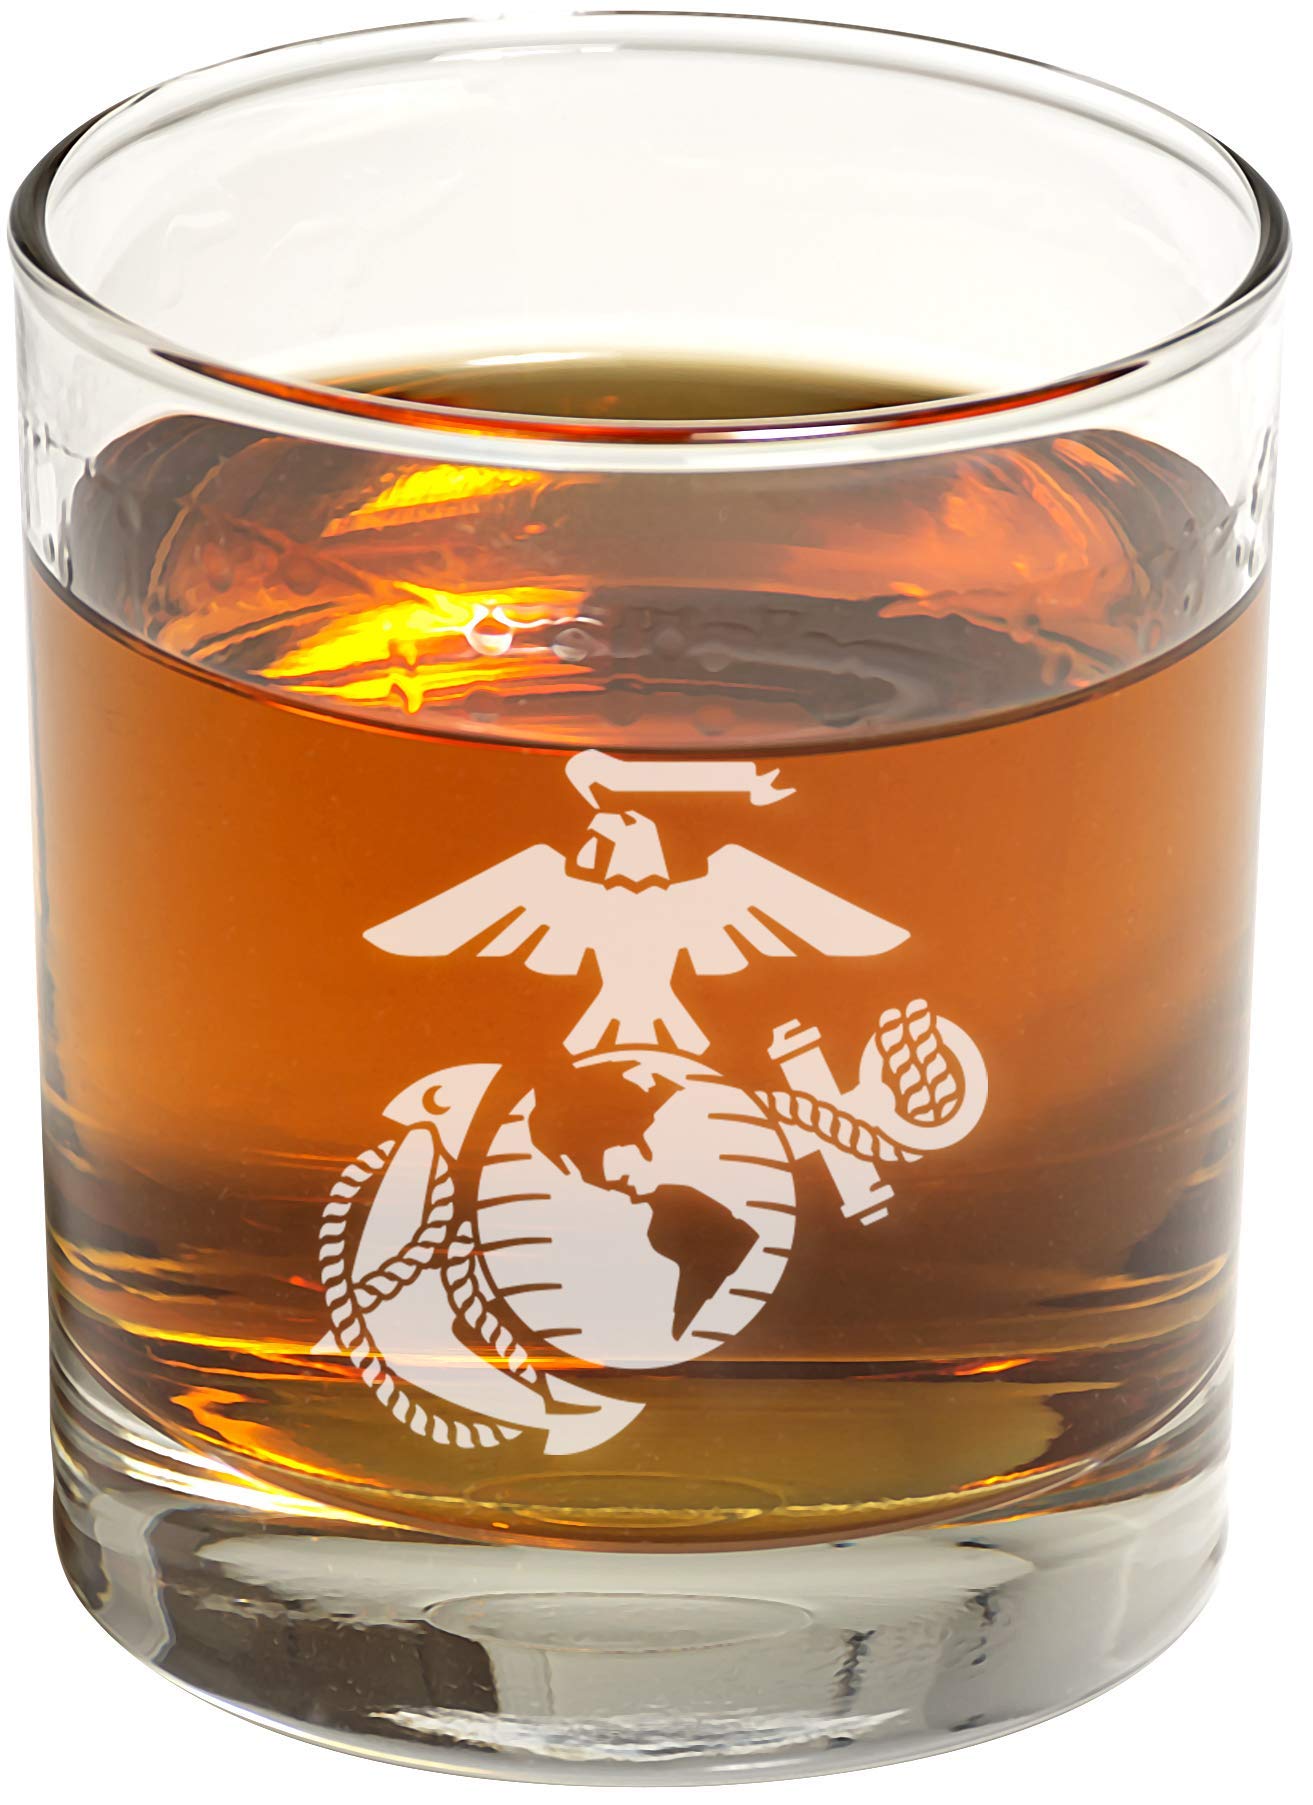 US Marine Corps Whiskey Glass (Set of Two) – Marine Corps Engraved Exquisite Whiskey Glass - Gifts for Whiskey Lovers - Marine Corps Present for Retirement, Birthday – Marine Corps Home Décor